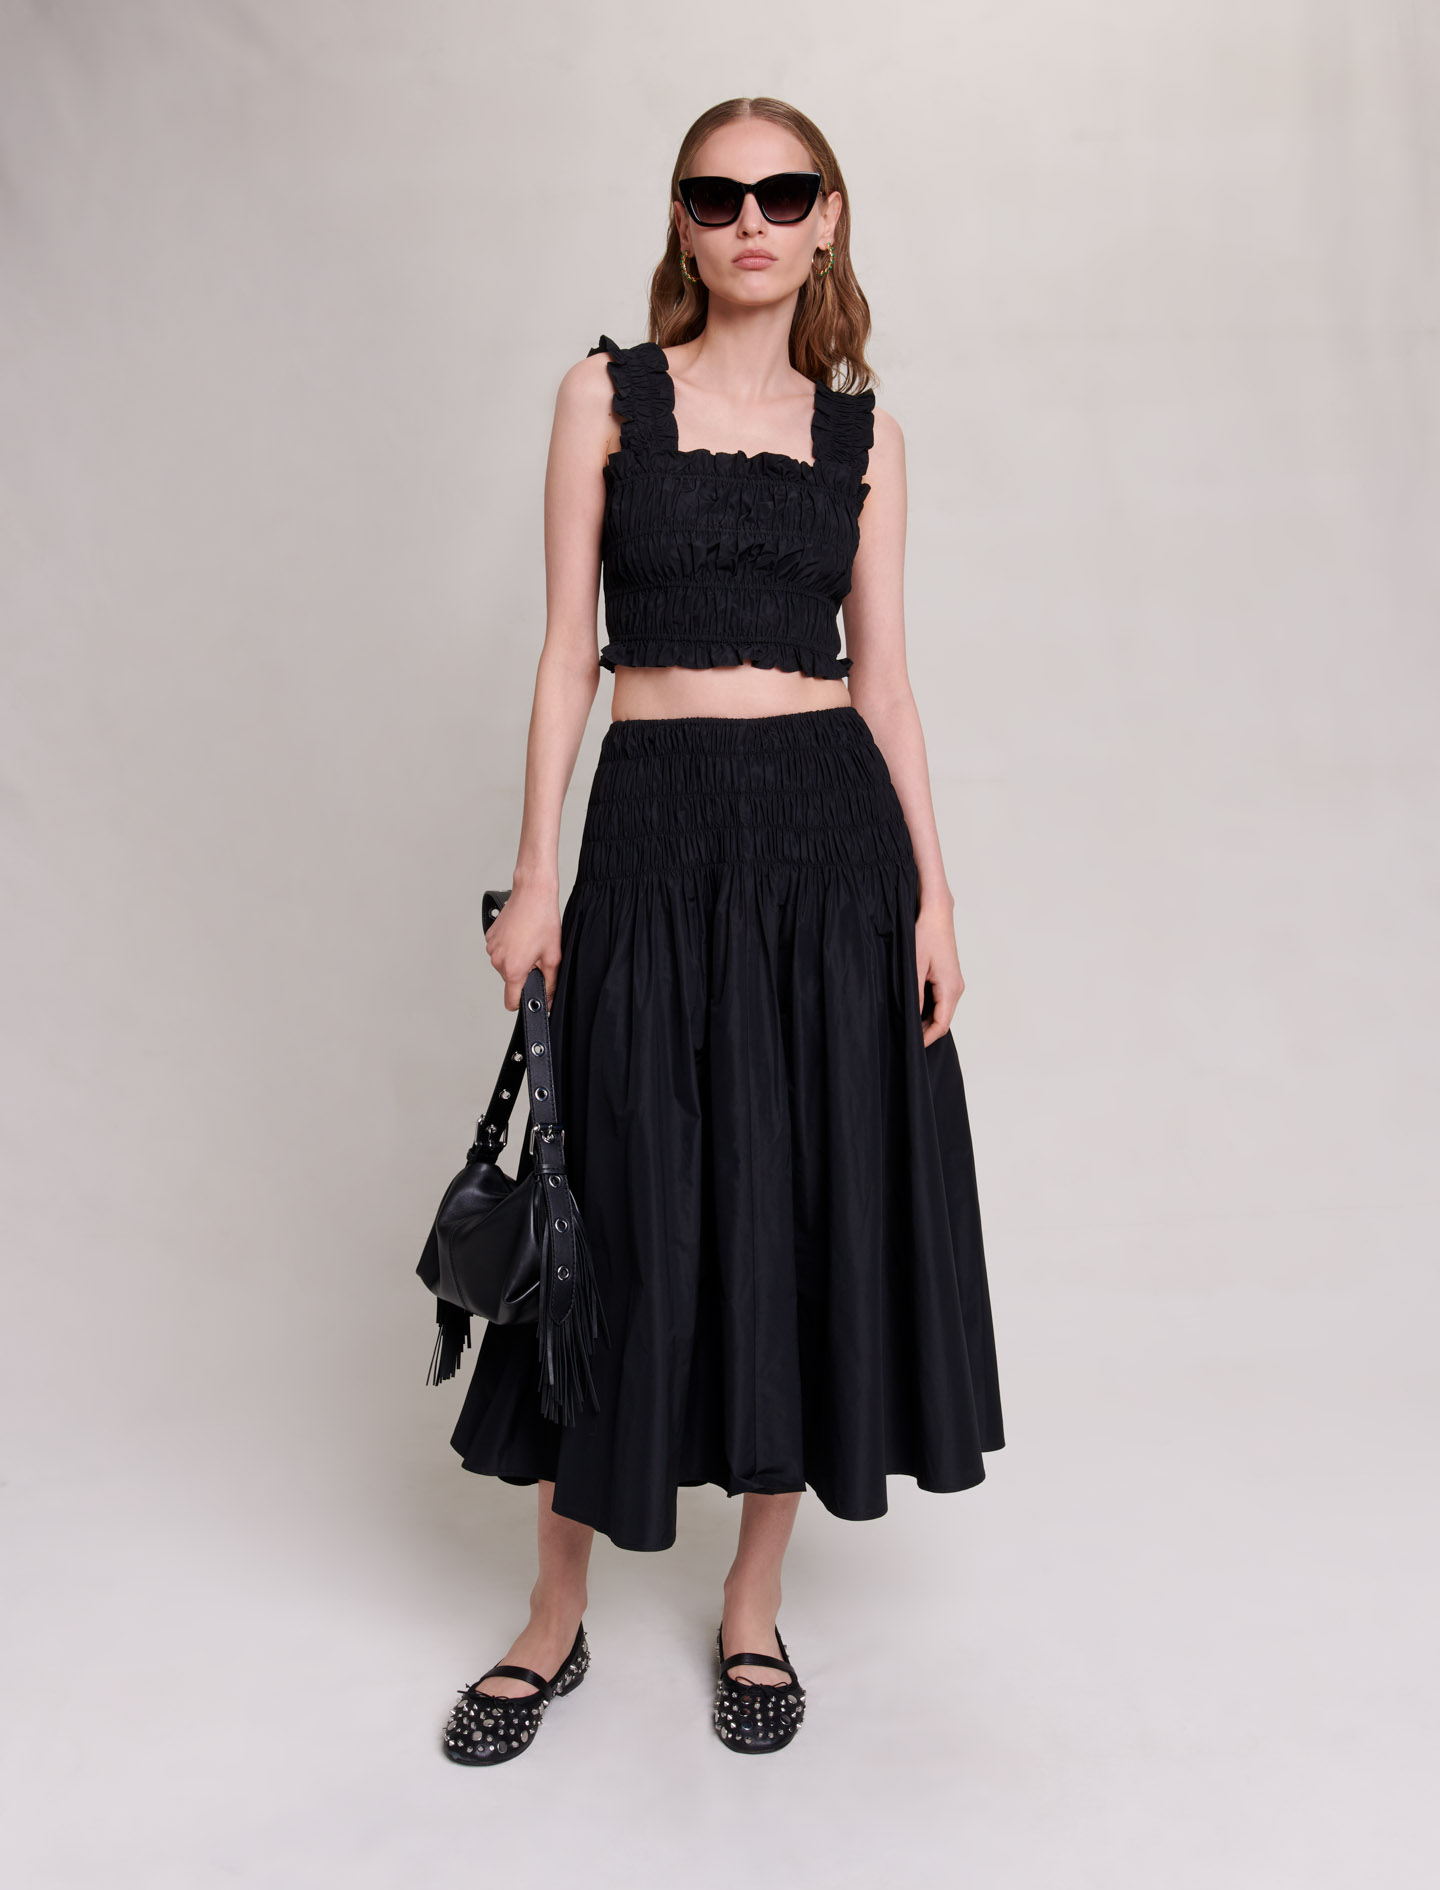 Maje Woman's polyester Elastic: Smocked maxi skirt for Fall/Winter, in color Black / Black